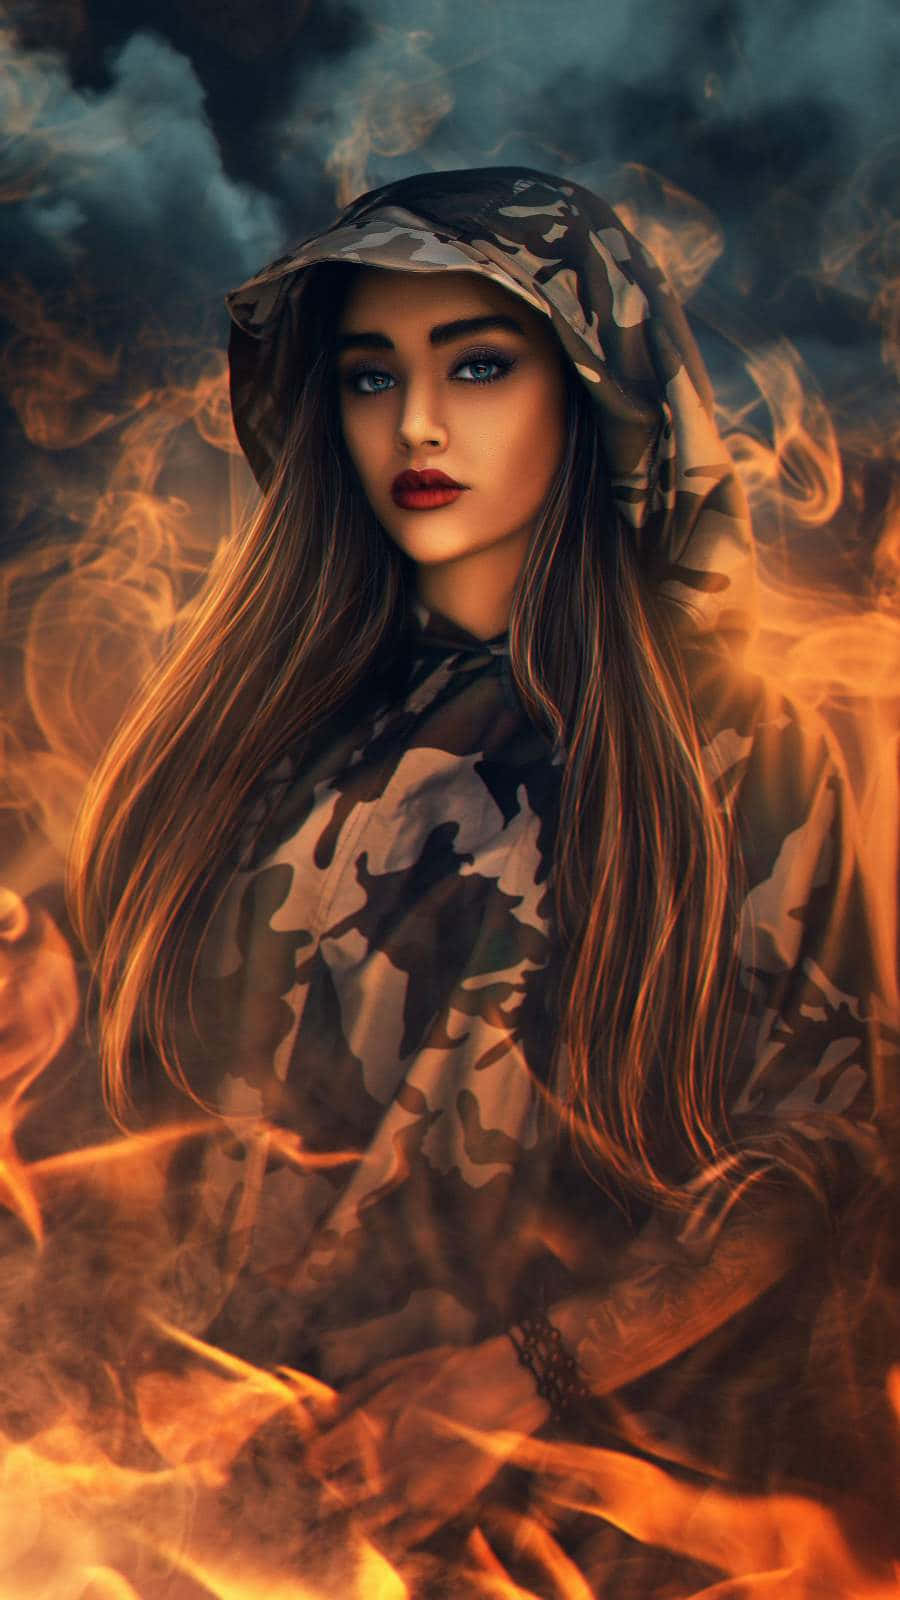 Pretty Girl Surrounded In Flames Background